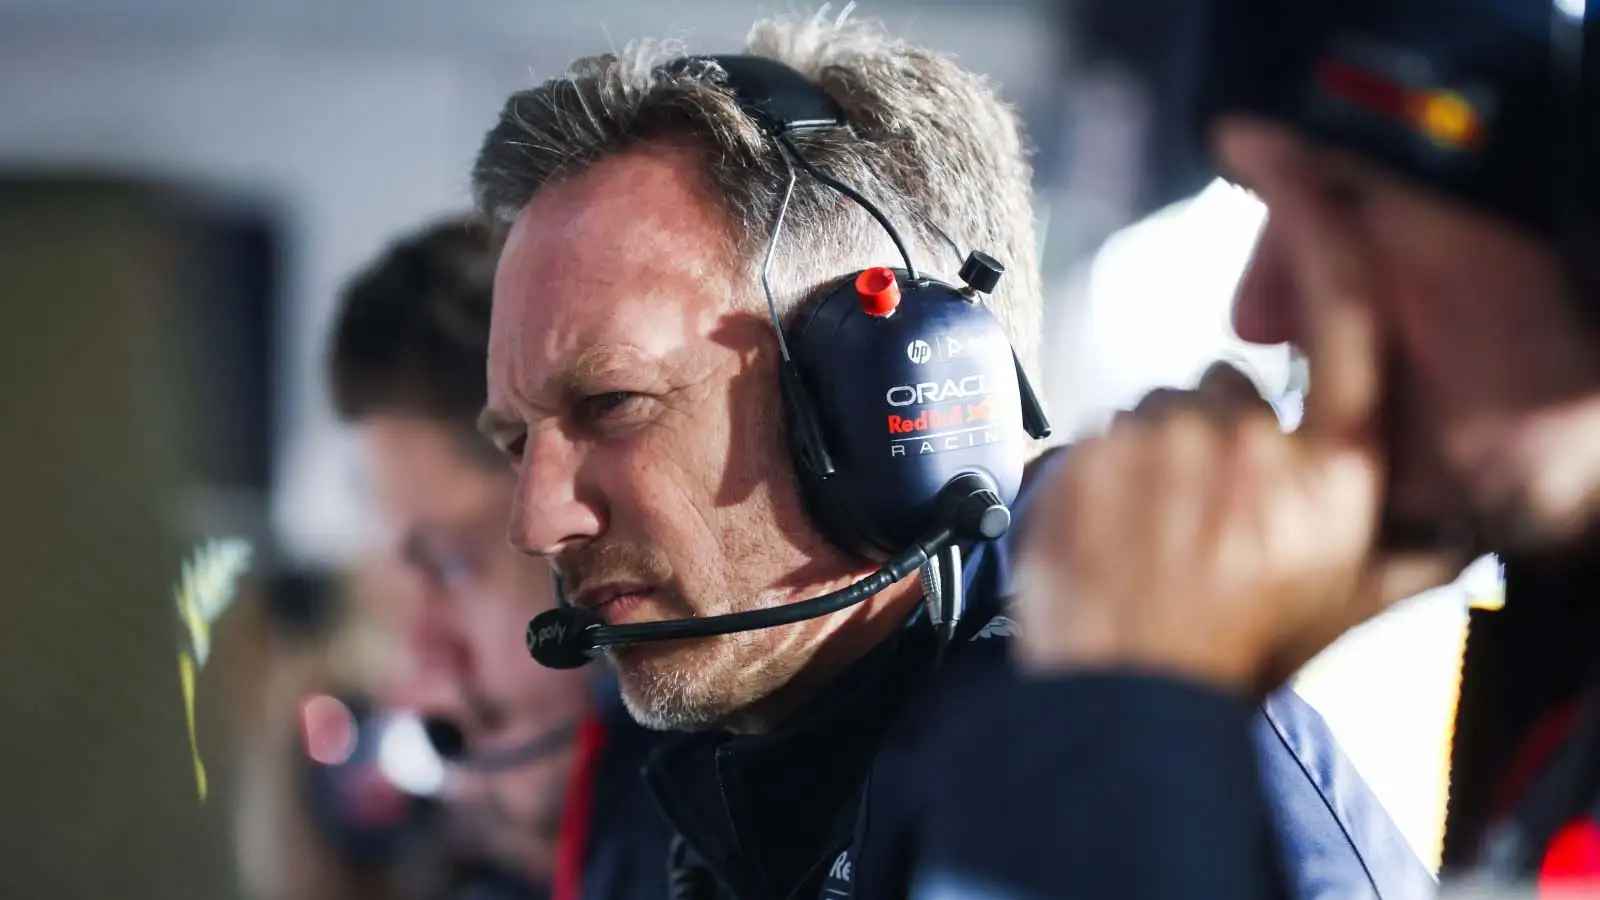 Christian Horner on the Las Vegas pit wall.